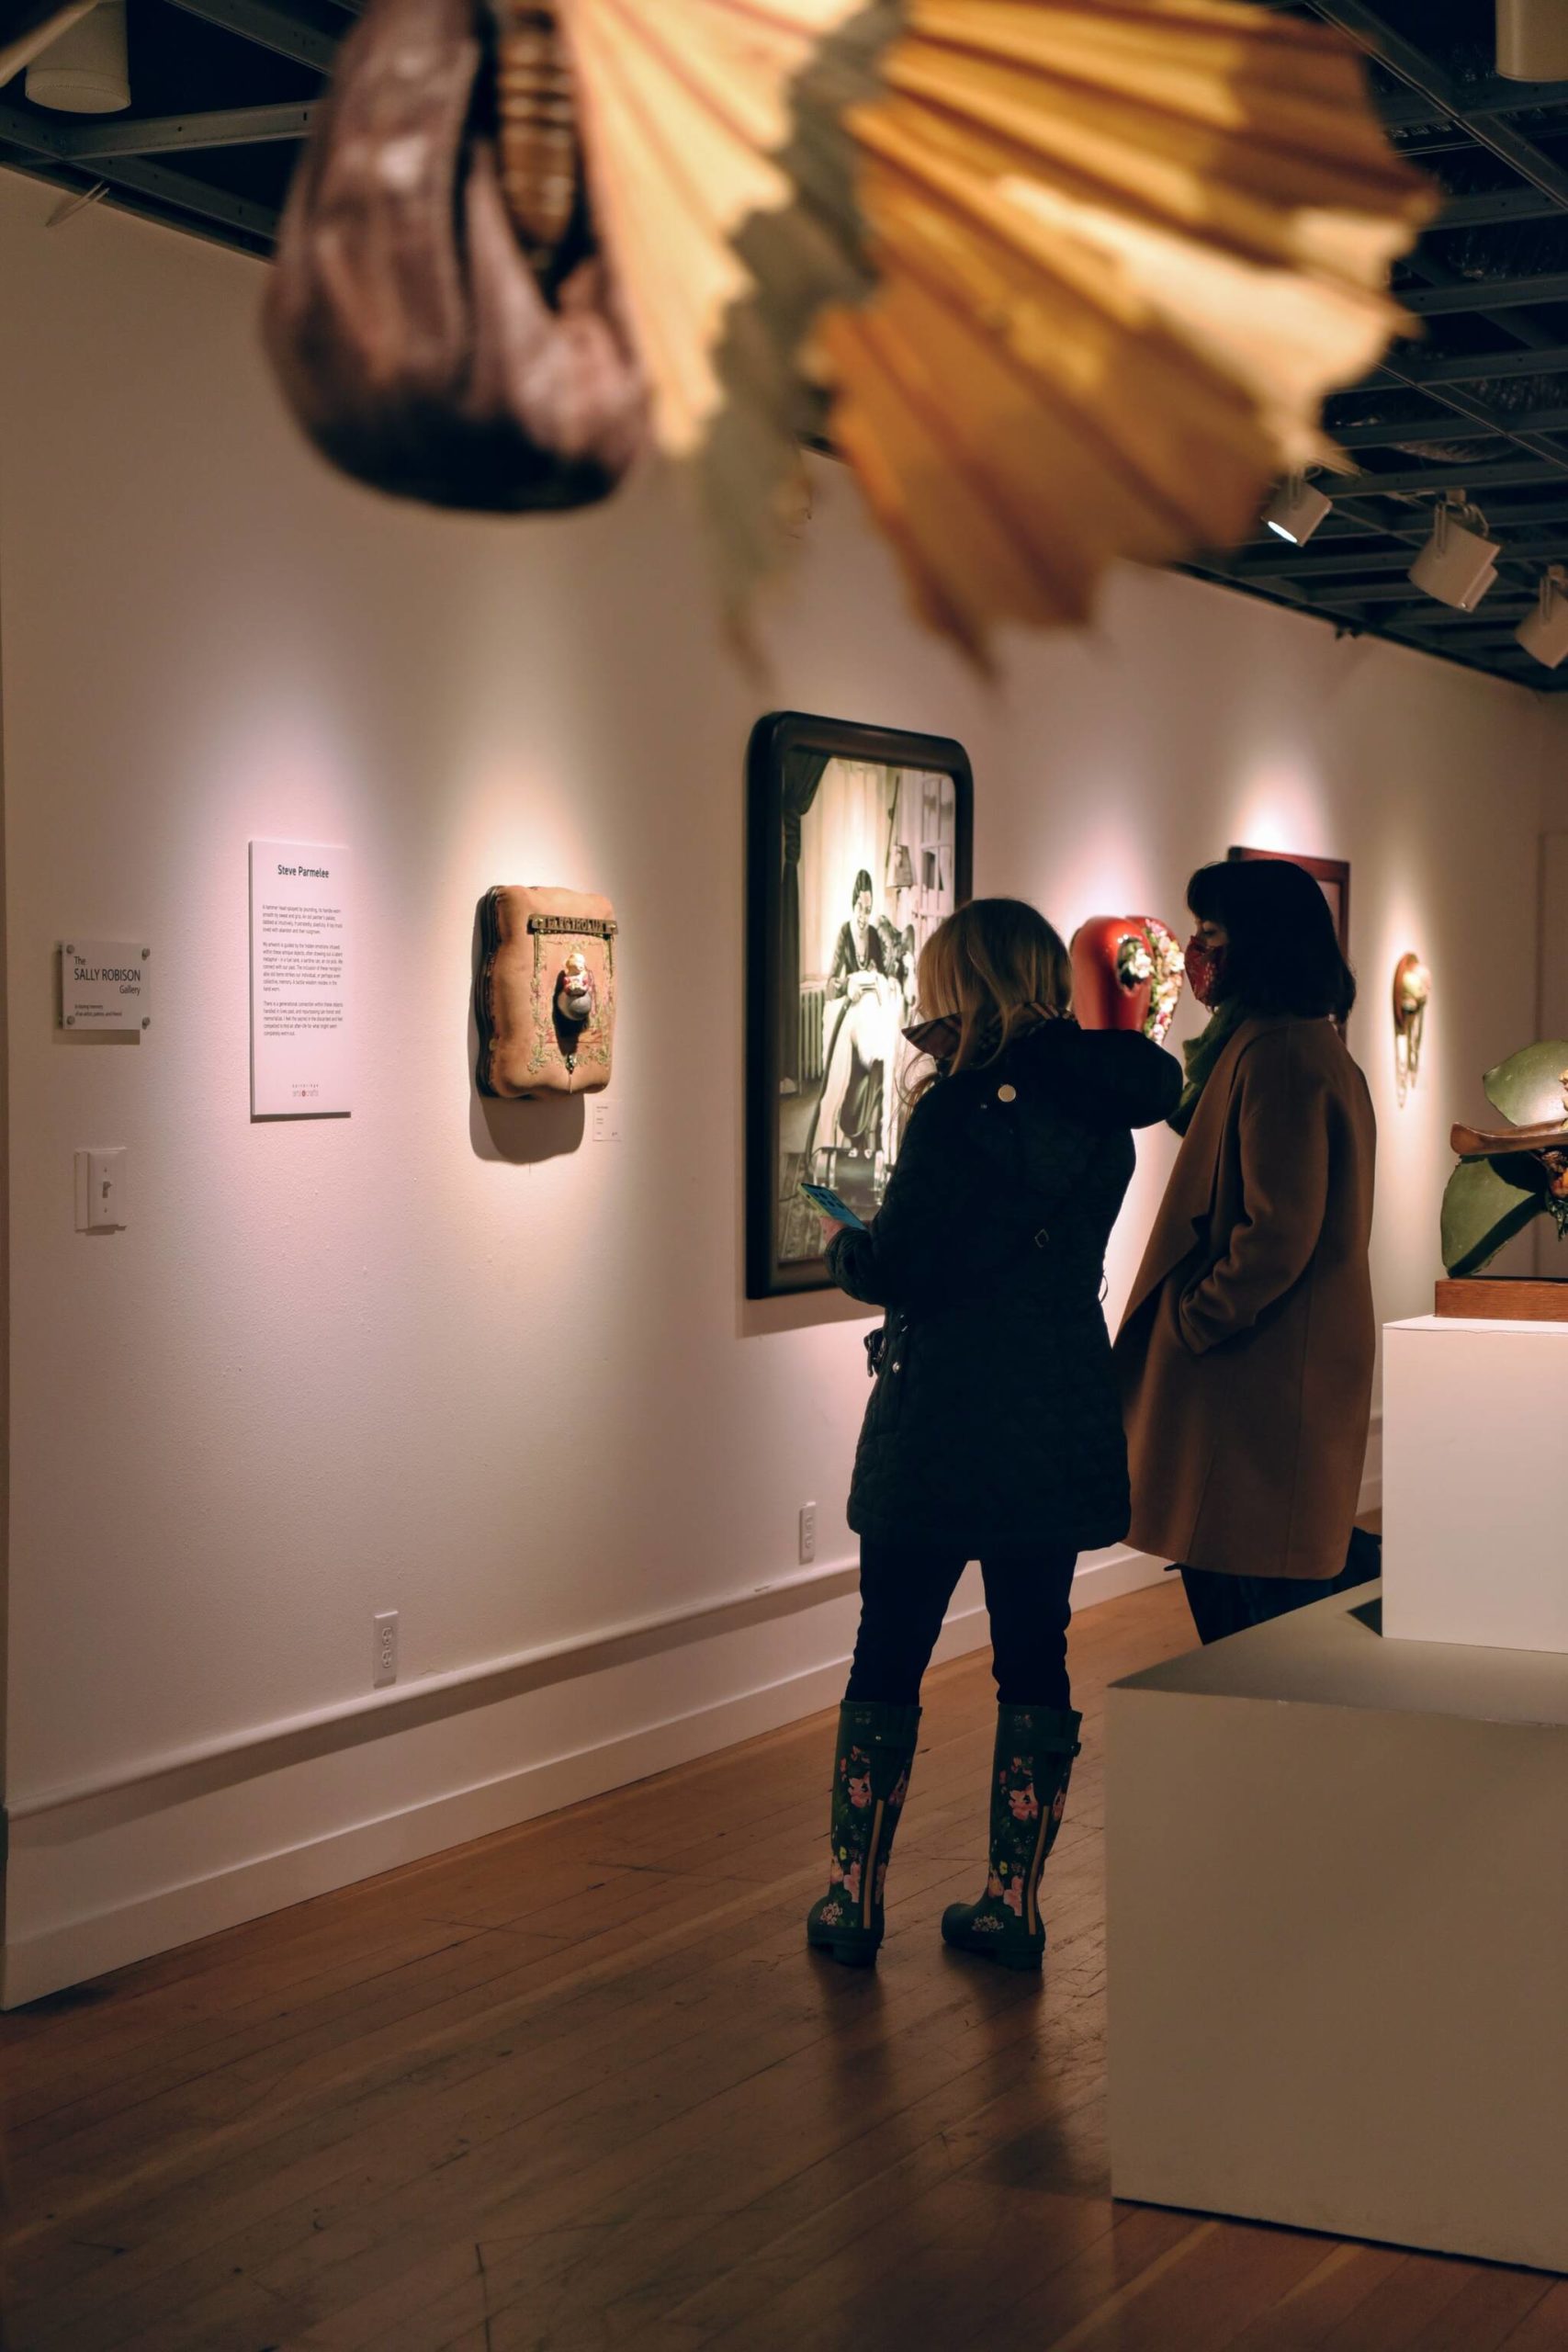 Two visitors viewing the Bygones art exhibition of paintings by Julie Read and assemblage by Steve Parmelee at the Bainbridge Arts and Crafts gallery at 151 Winslow Way E. Nancy Treder/Bainbridge Island Review photos